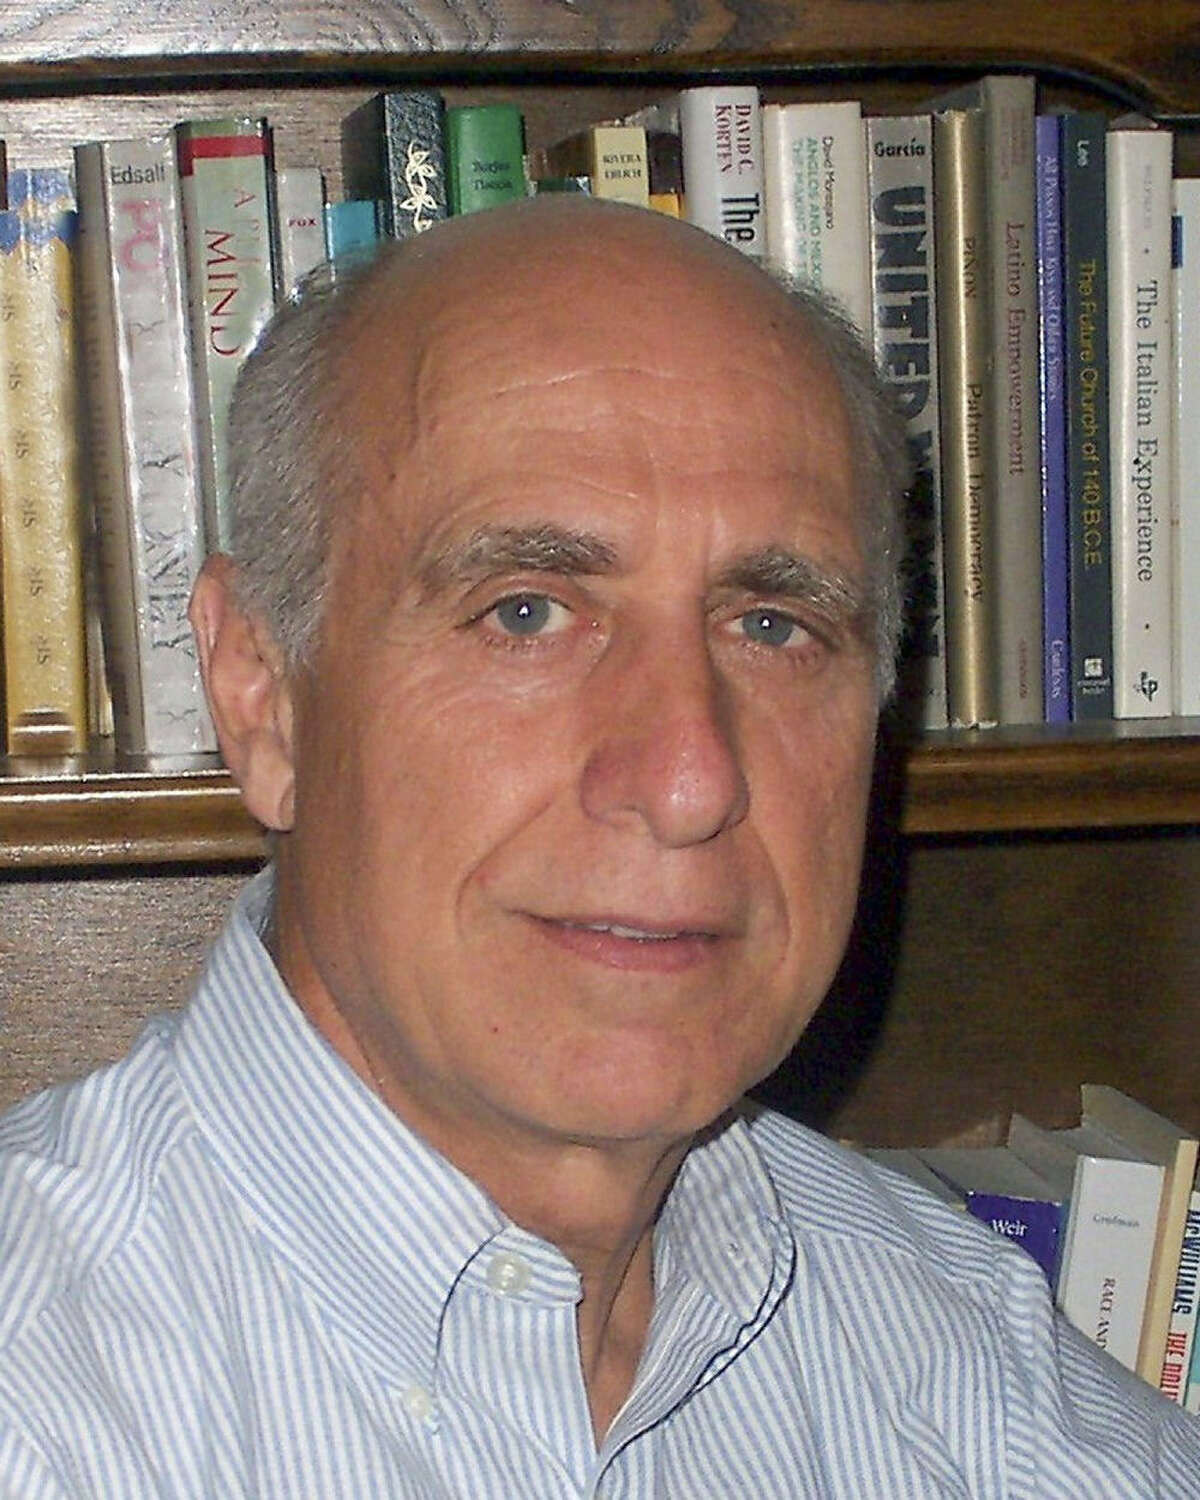 Robert Brischetto is a research consultant and president of Social Research Services Inc.